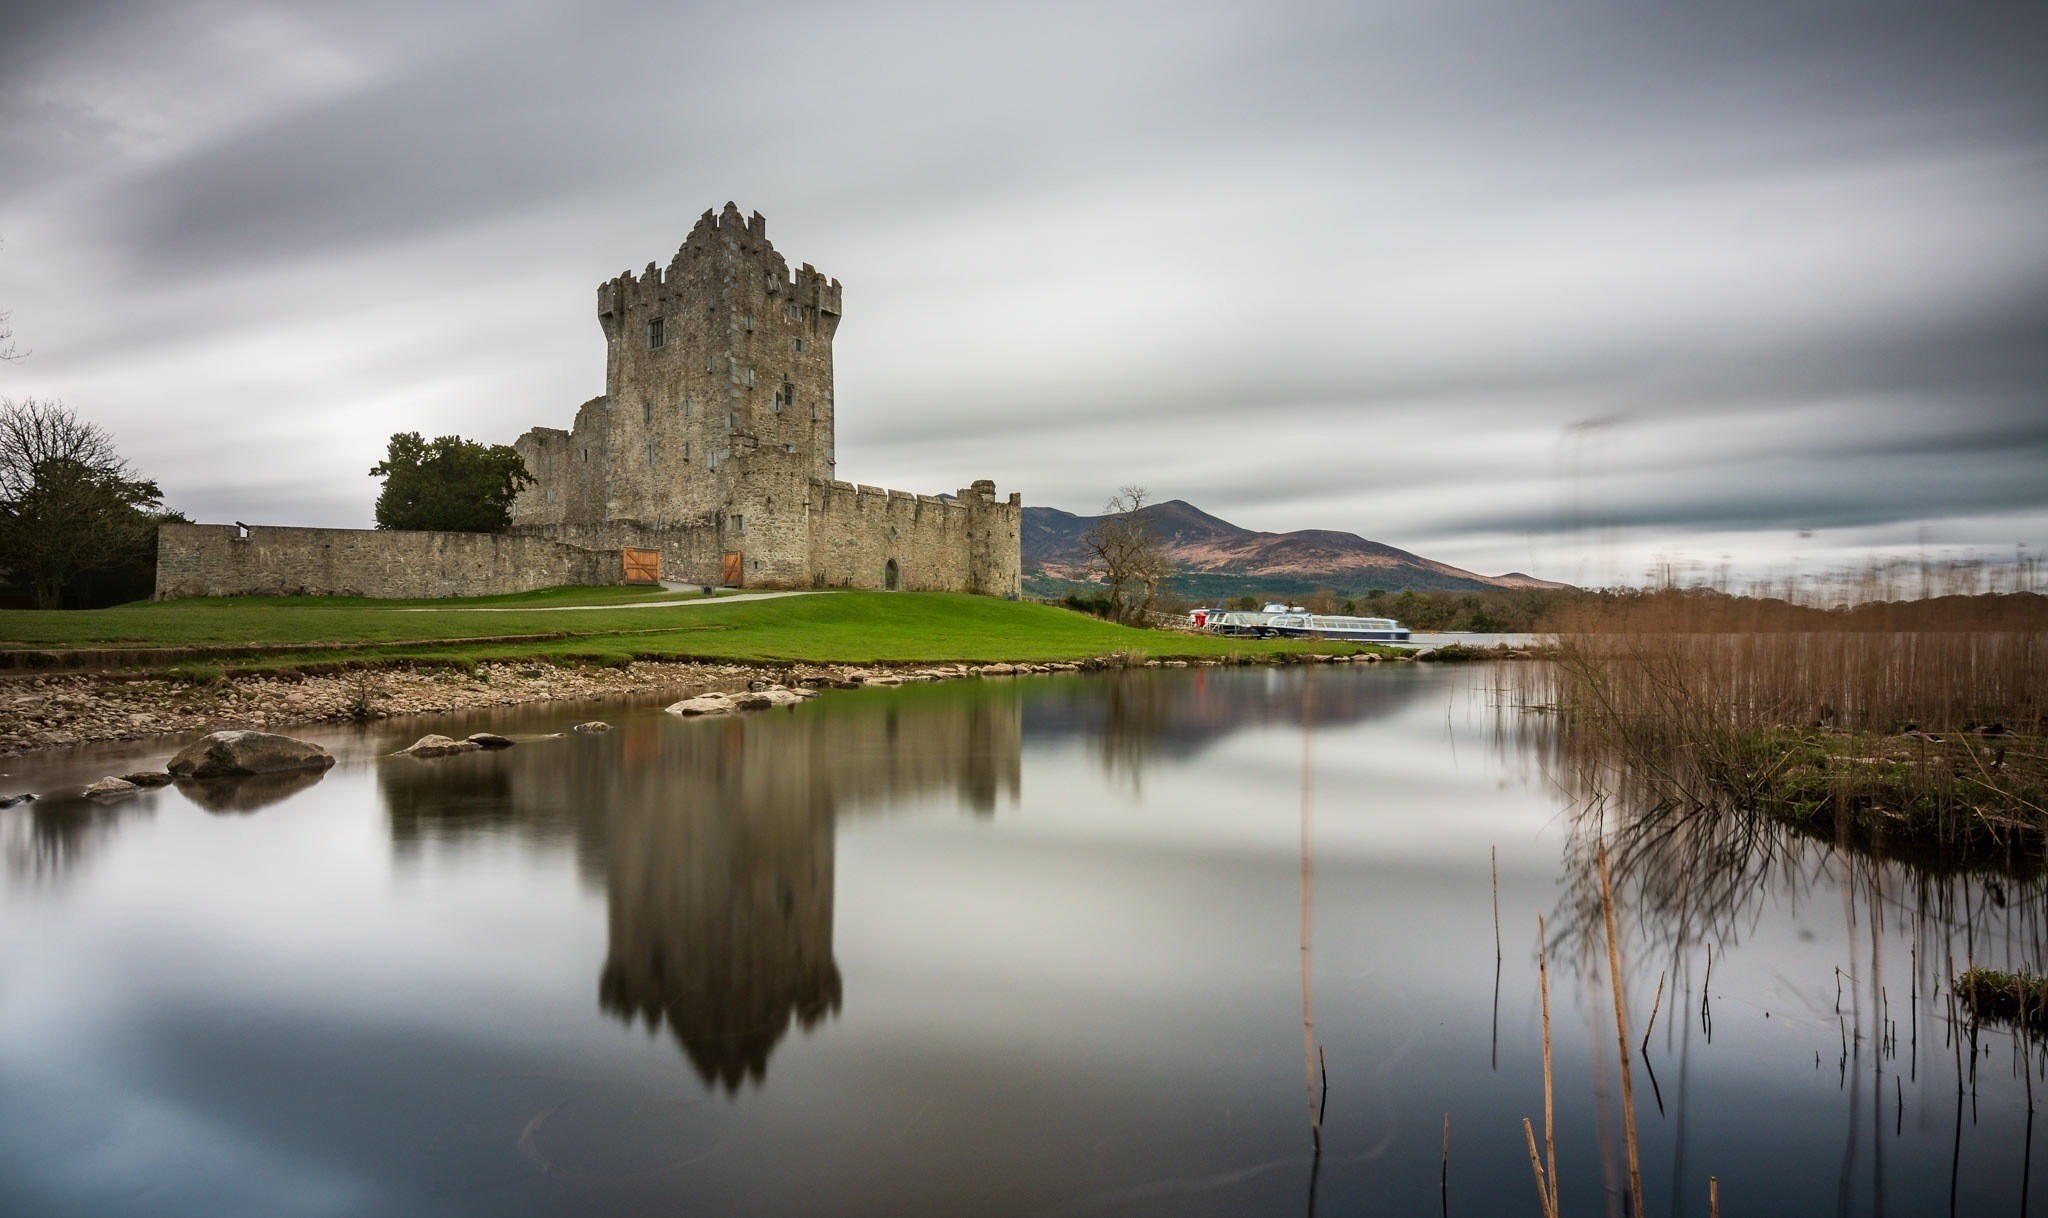 Guide to Ross Castle & Killarney National Park